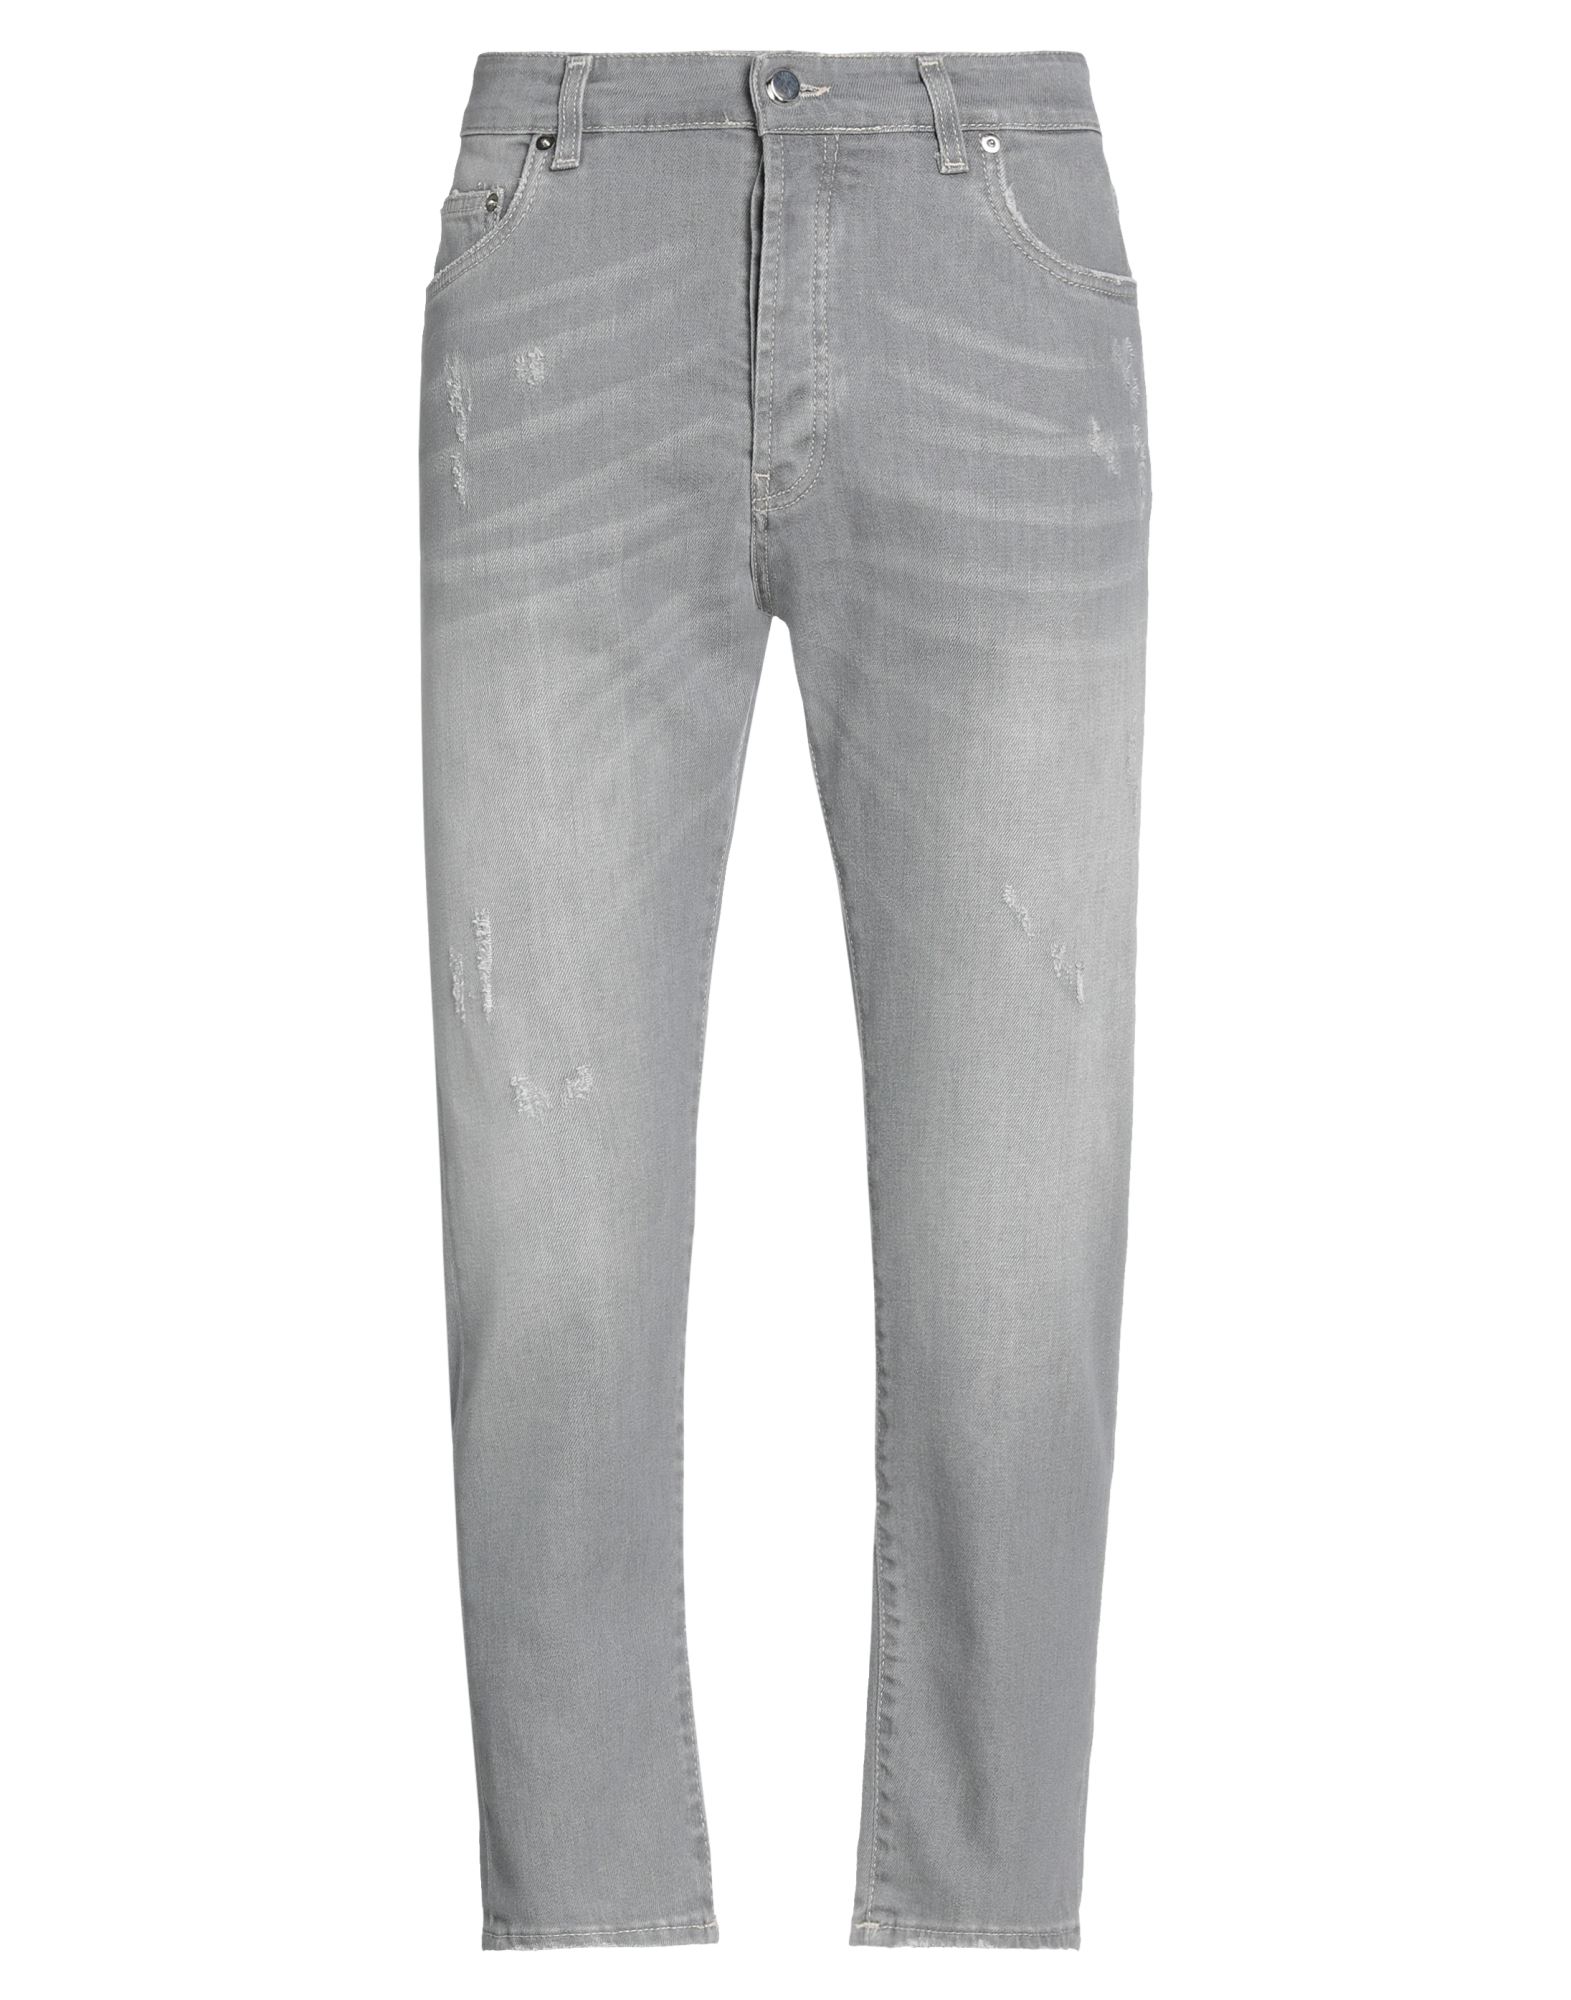 Low Brand Jeans In Grey